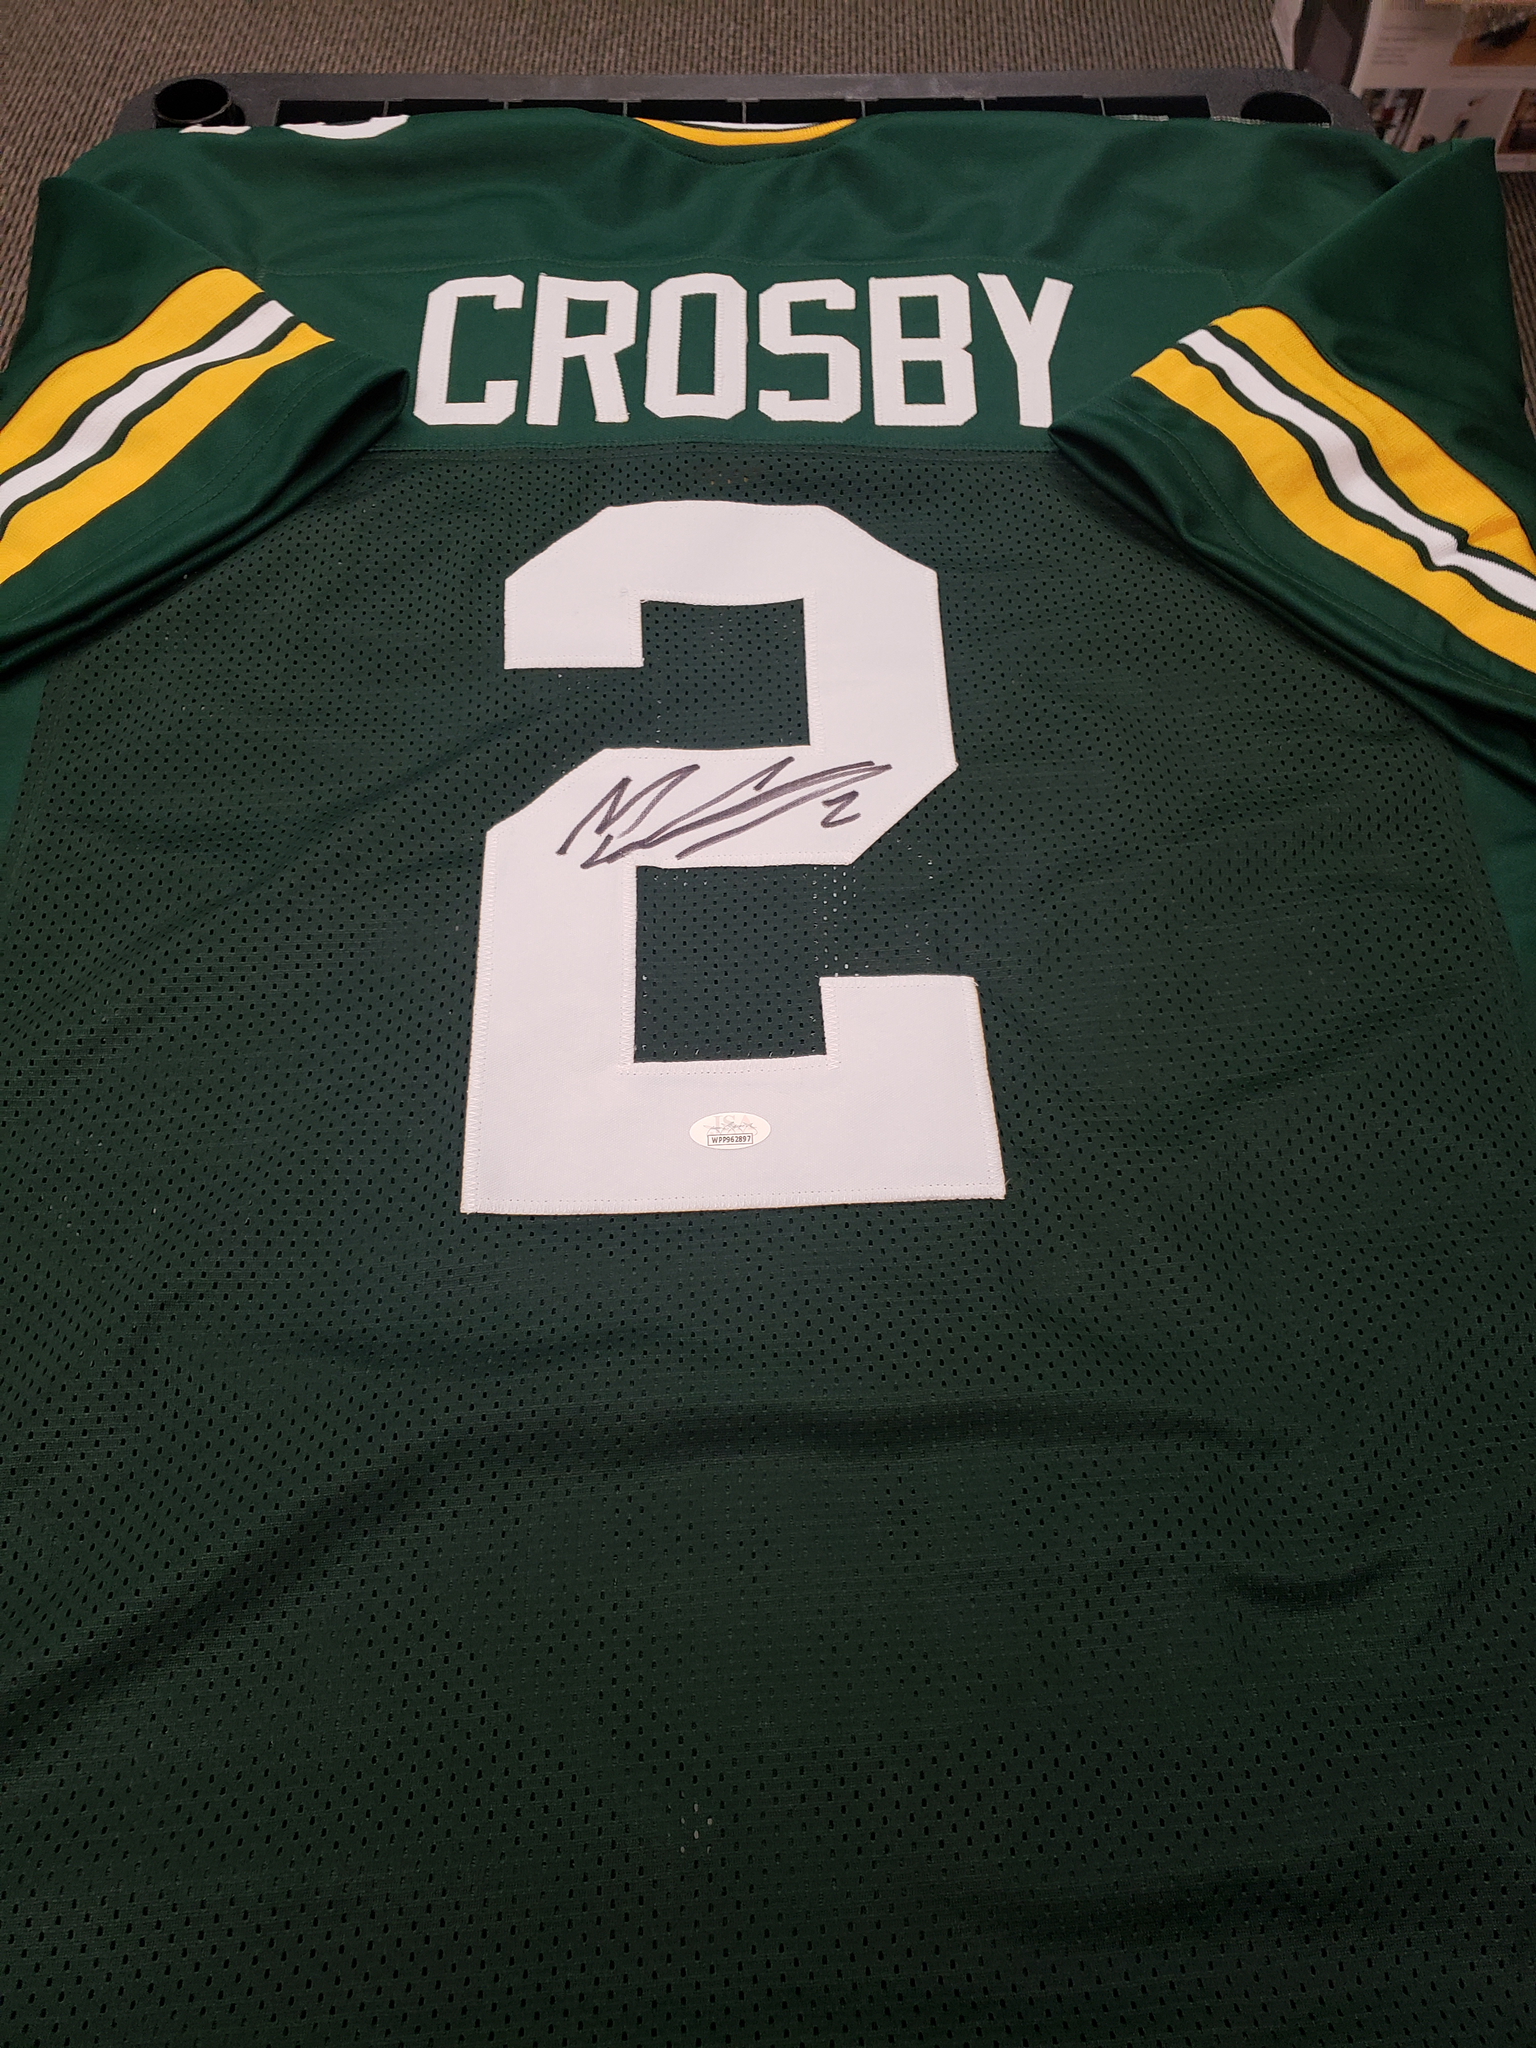 Mason Crosby autographed jersey – Superstars Of The Game